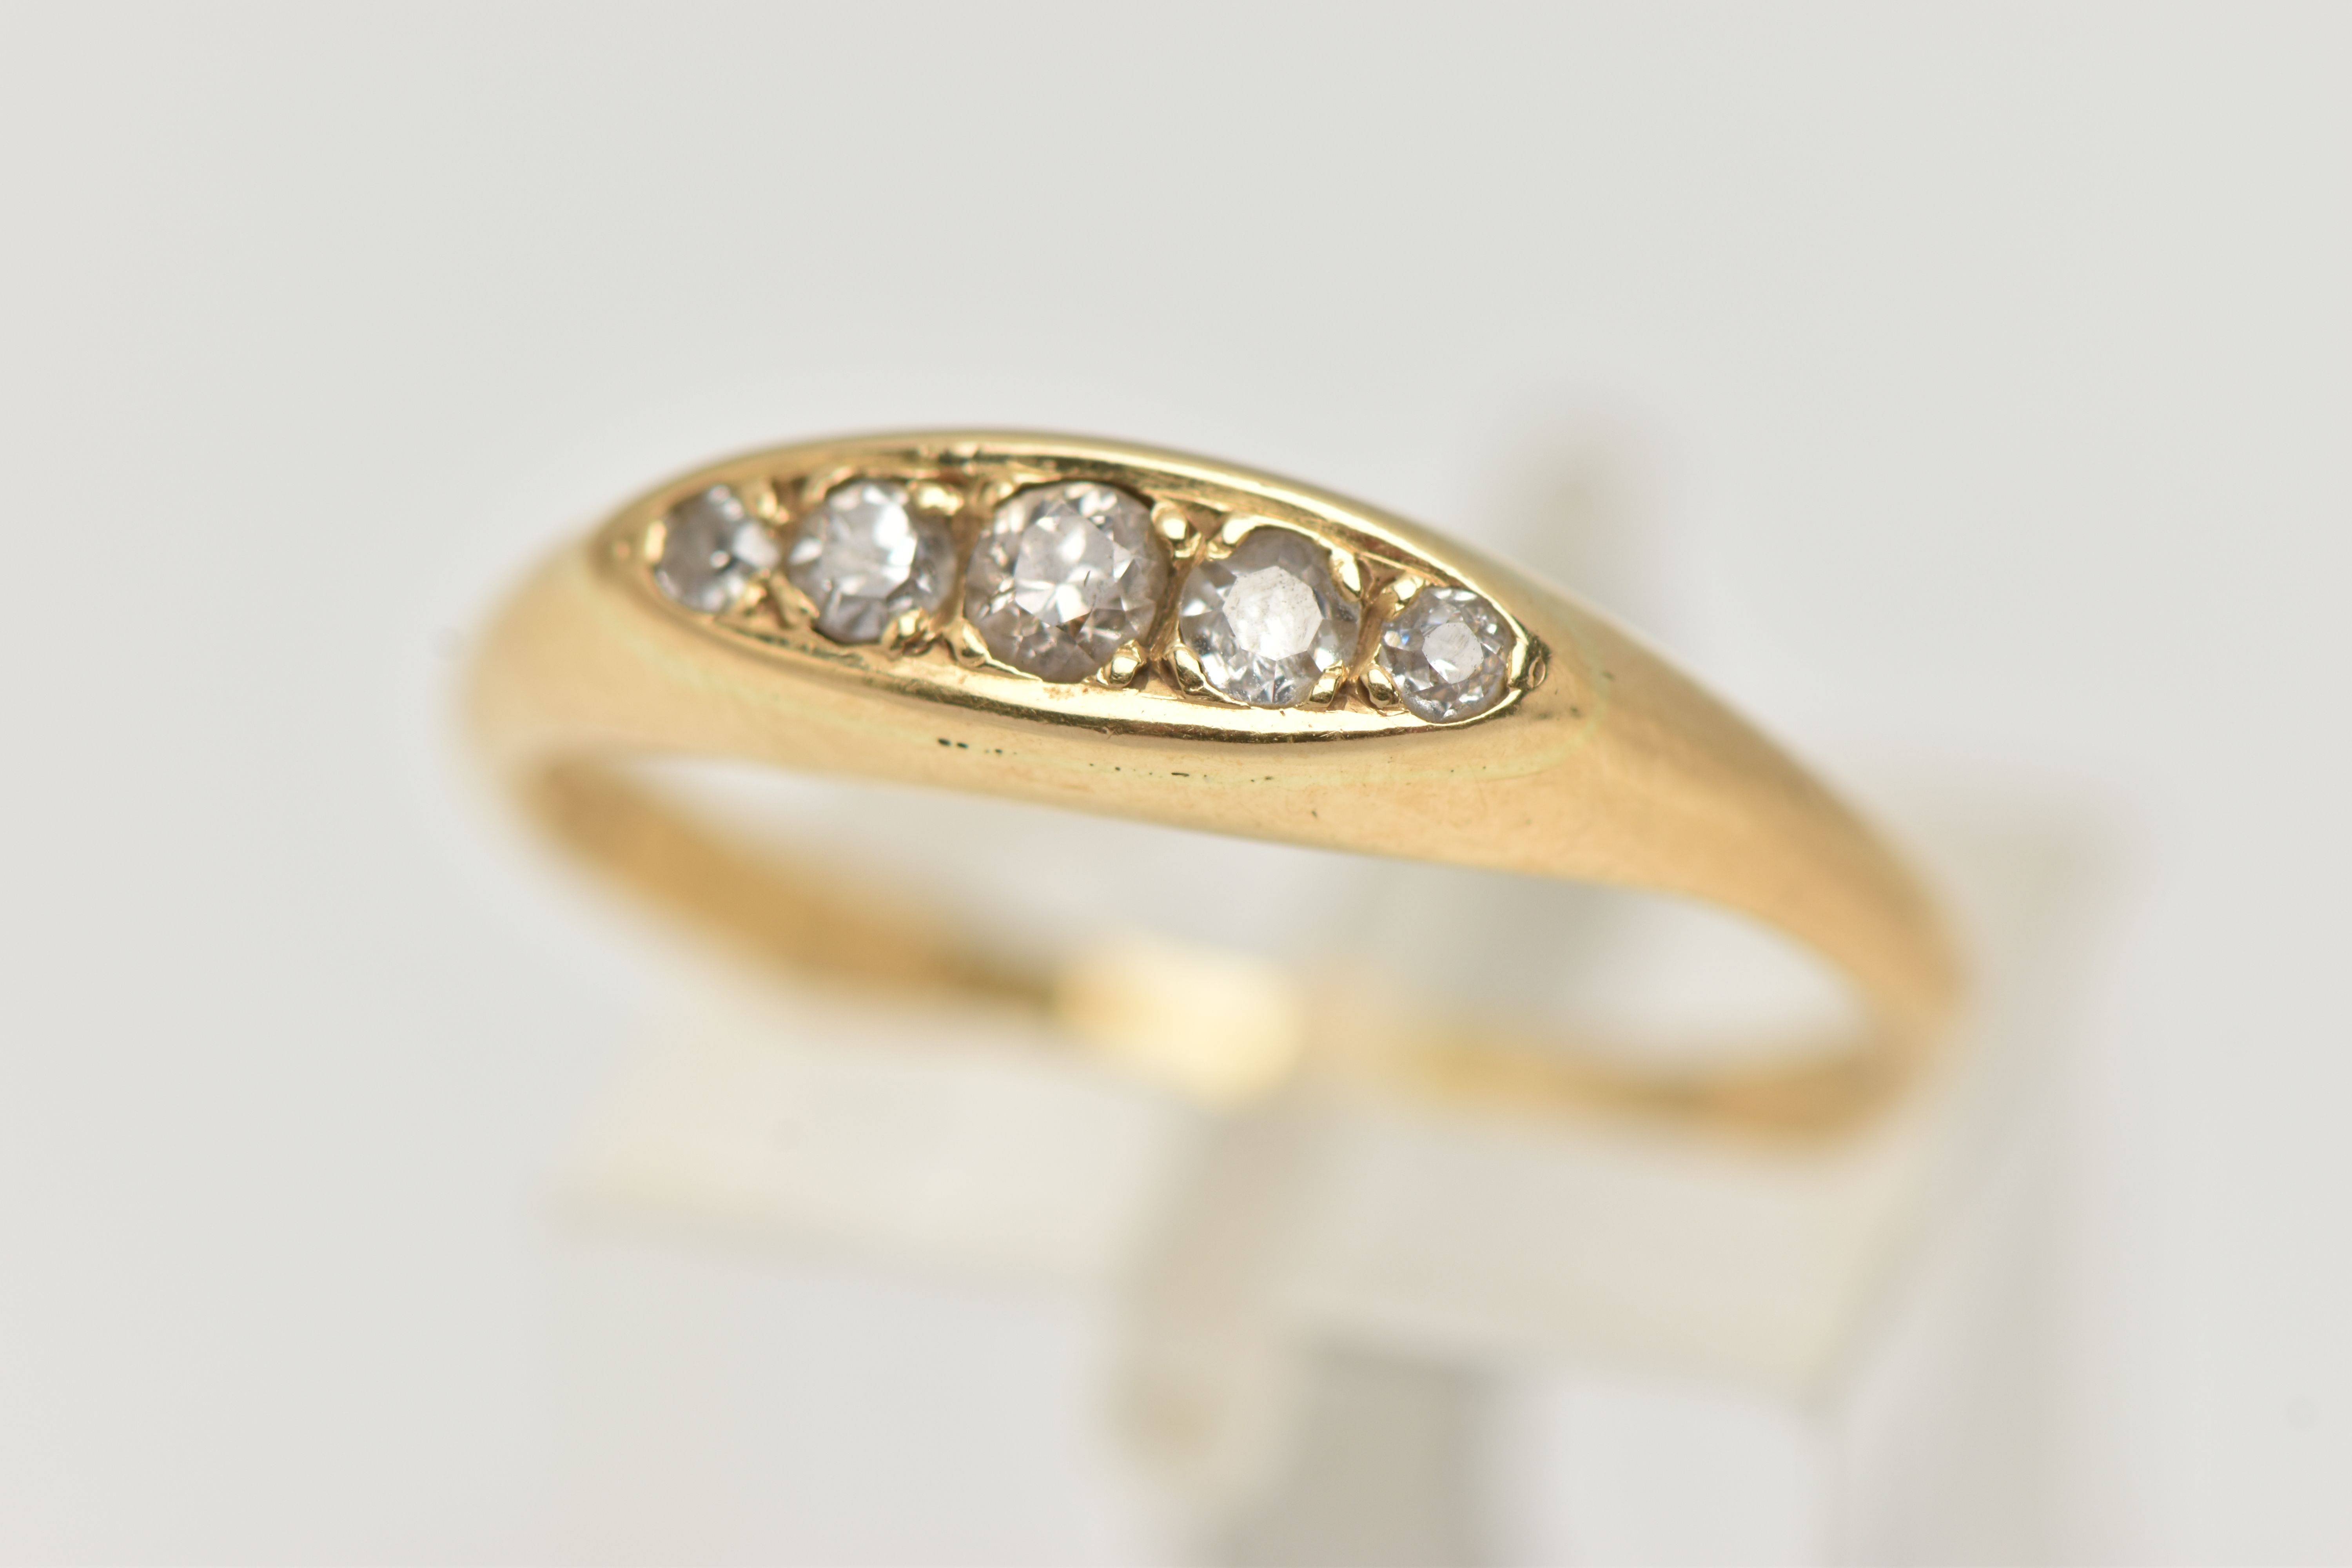 AN 18CT GOLD DIAMOND BOAT RING, set with five graduated diamonds, estimated total diamond weight 0.